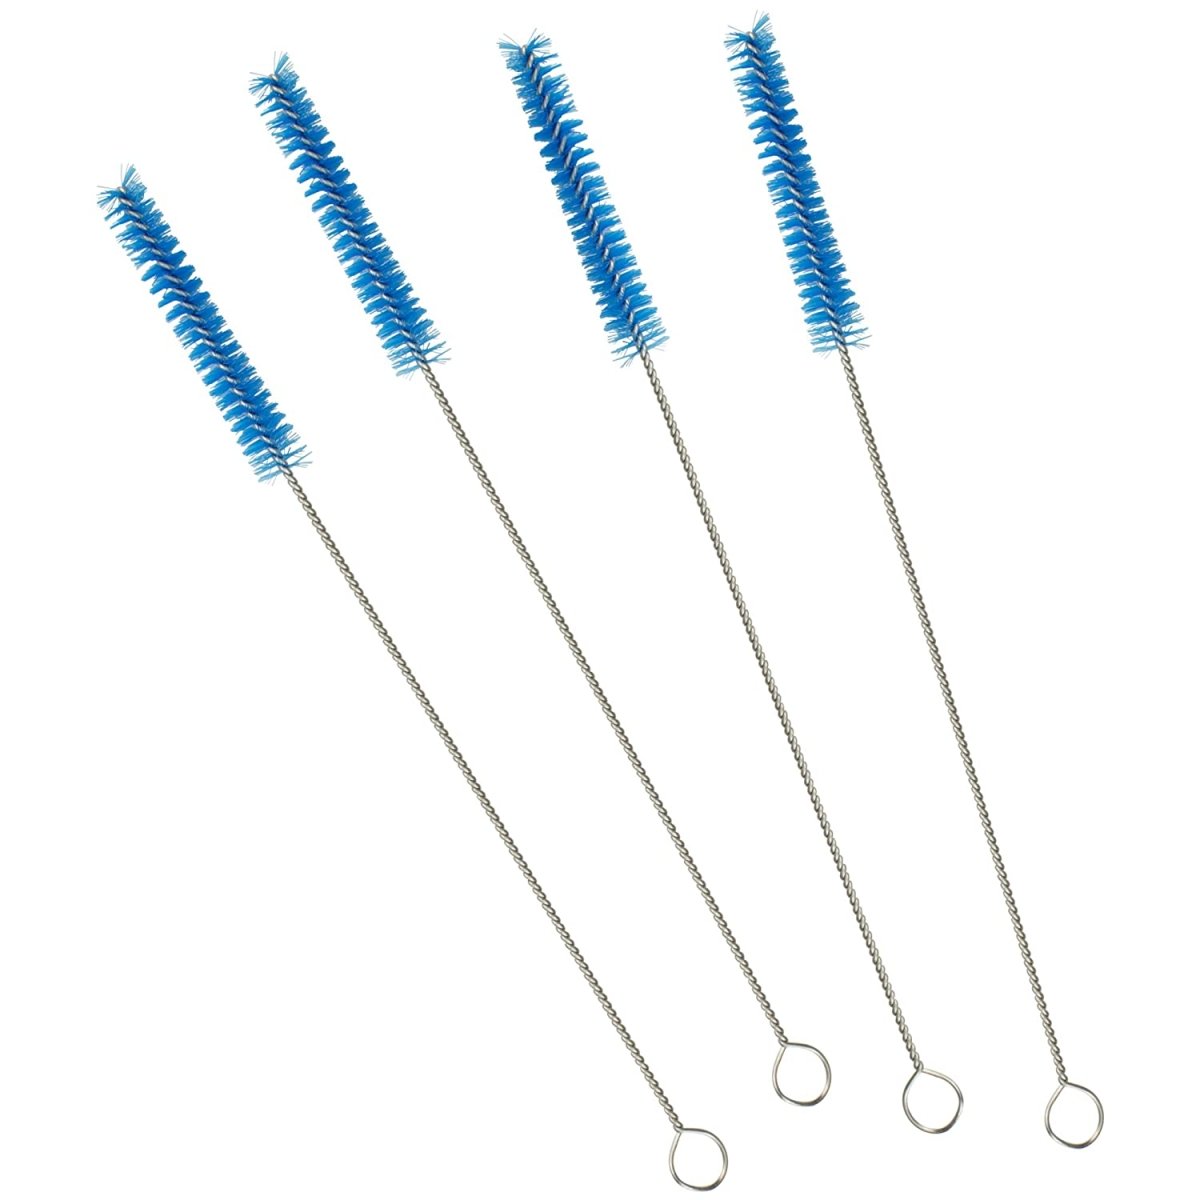 Dr. Browns Cleaning Brush 4-Pack - Blue - DB620-INTL-P10